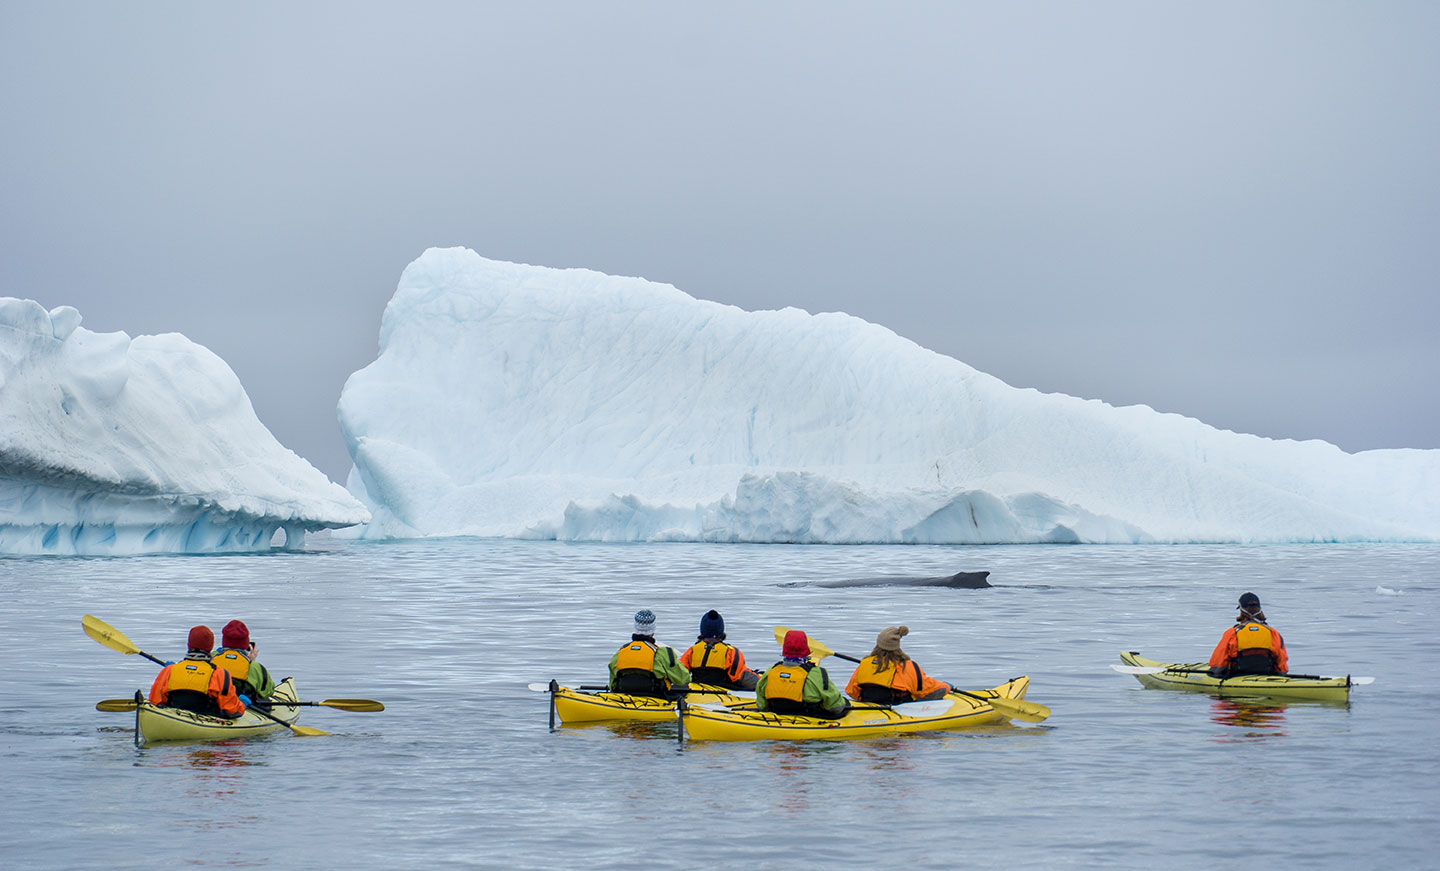 Kayaking and paddling excursions often reward travelers with incredible views of icebergs and whales.